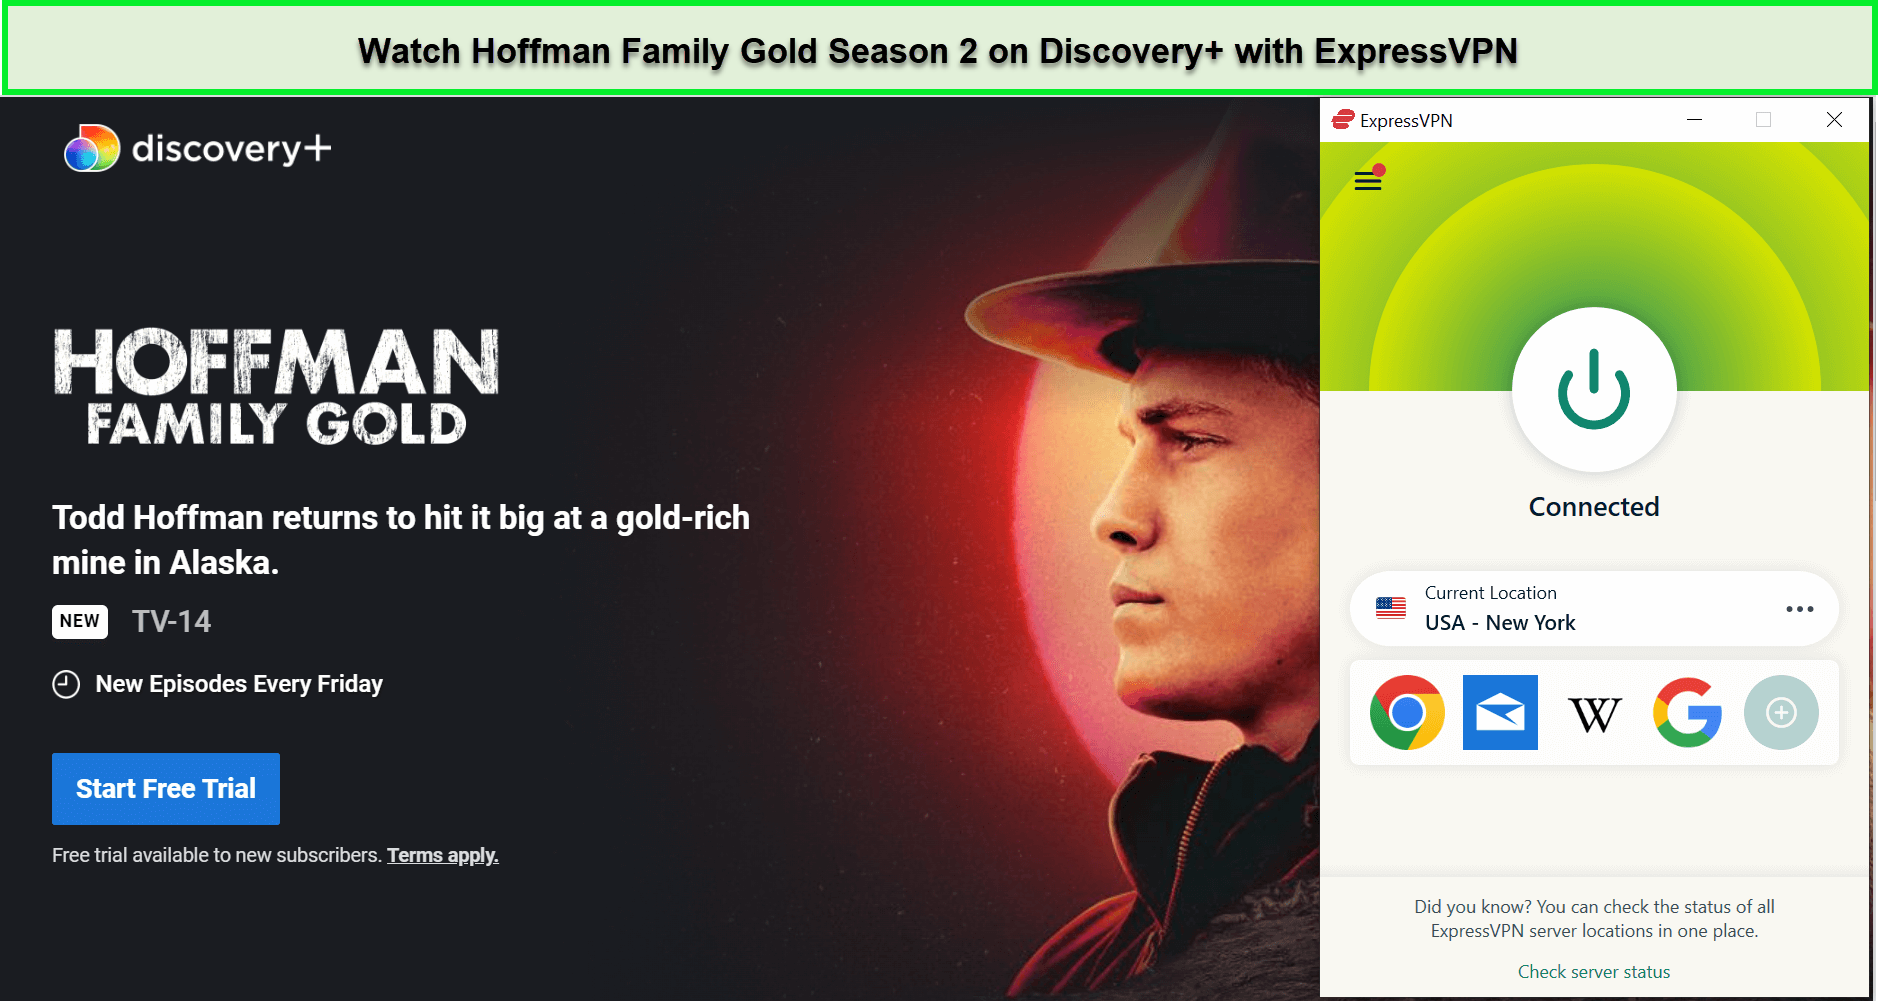 Watch-Hoffman-Family-Gold-Season-2-in-de-on-Discovery-with-ExpressVPN.